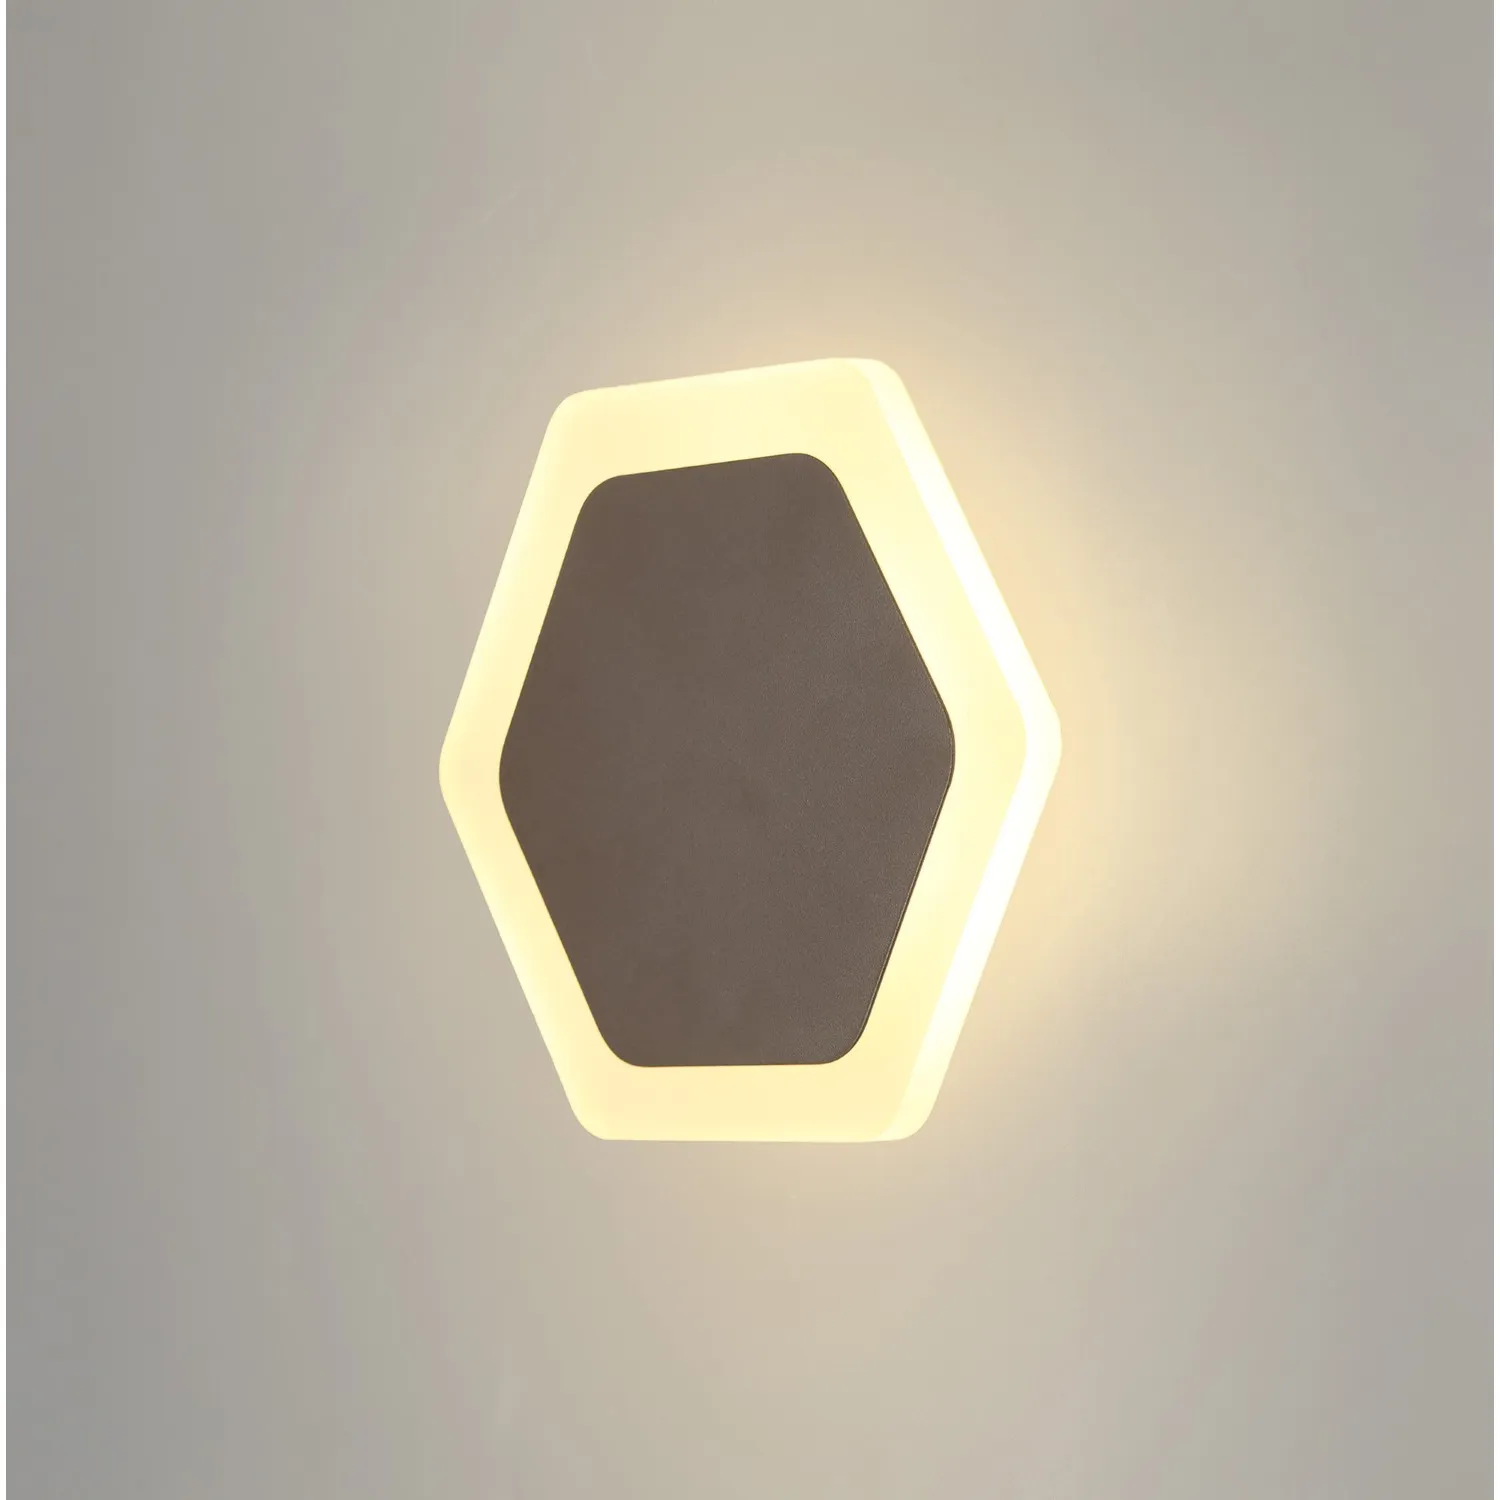 Edgware Magnetic Base Wall Lamp, 12W LED 3000K 498lm, 15 19cm Horizontal Hexagonal Centre, Coffee Acrylic Frosted Diffuser